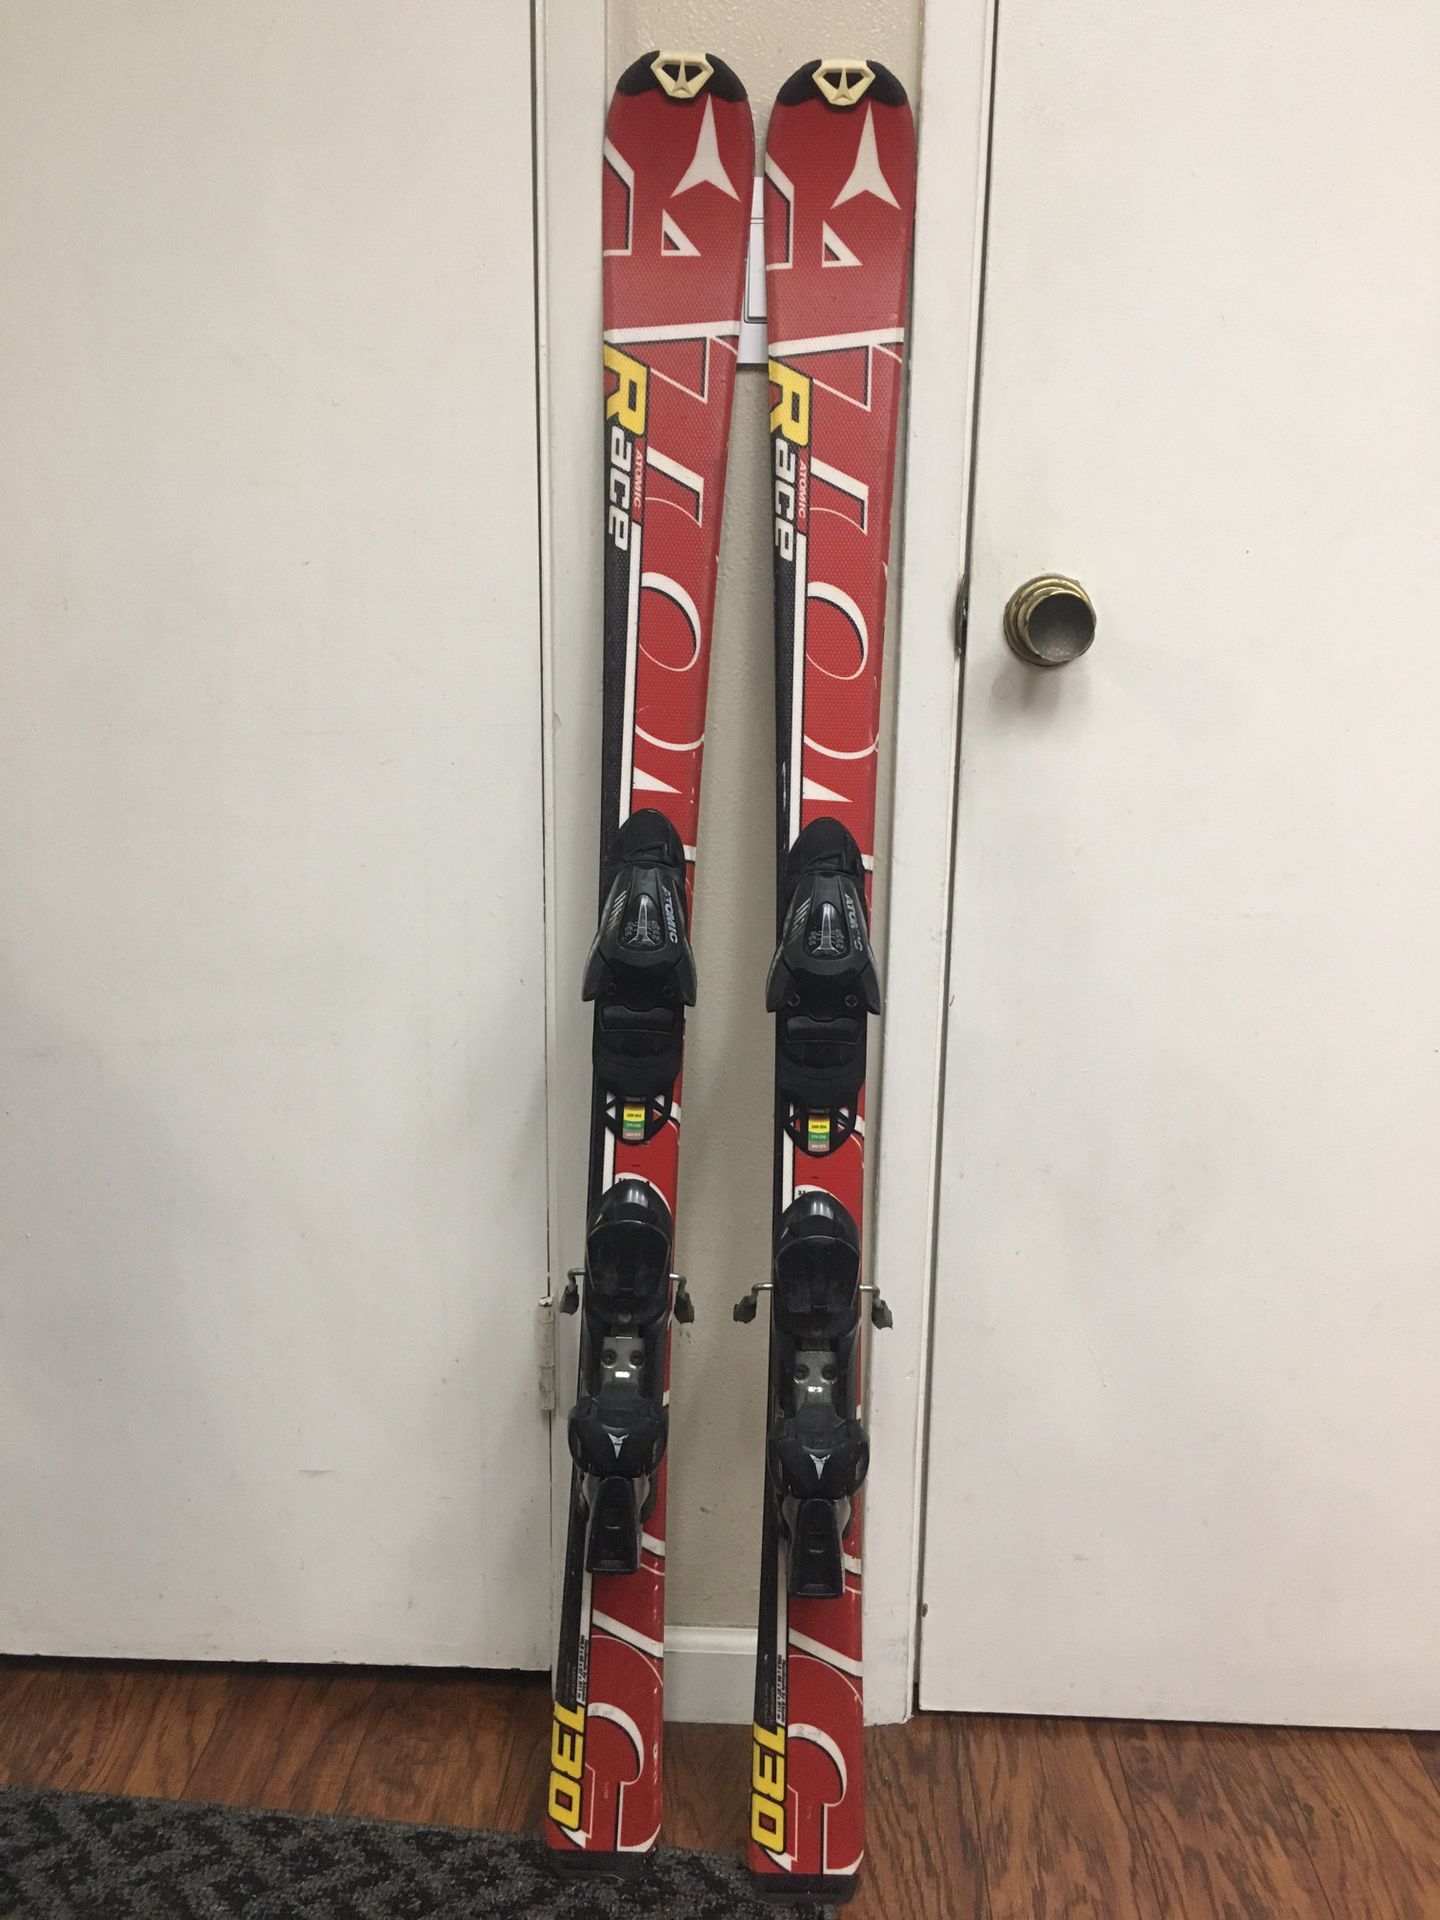 130cm atomic race skis with demo bindings fits most sizes of boots. Waxed and sharpened, ready to go